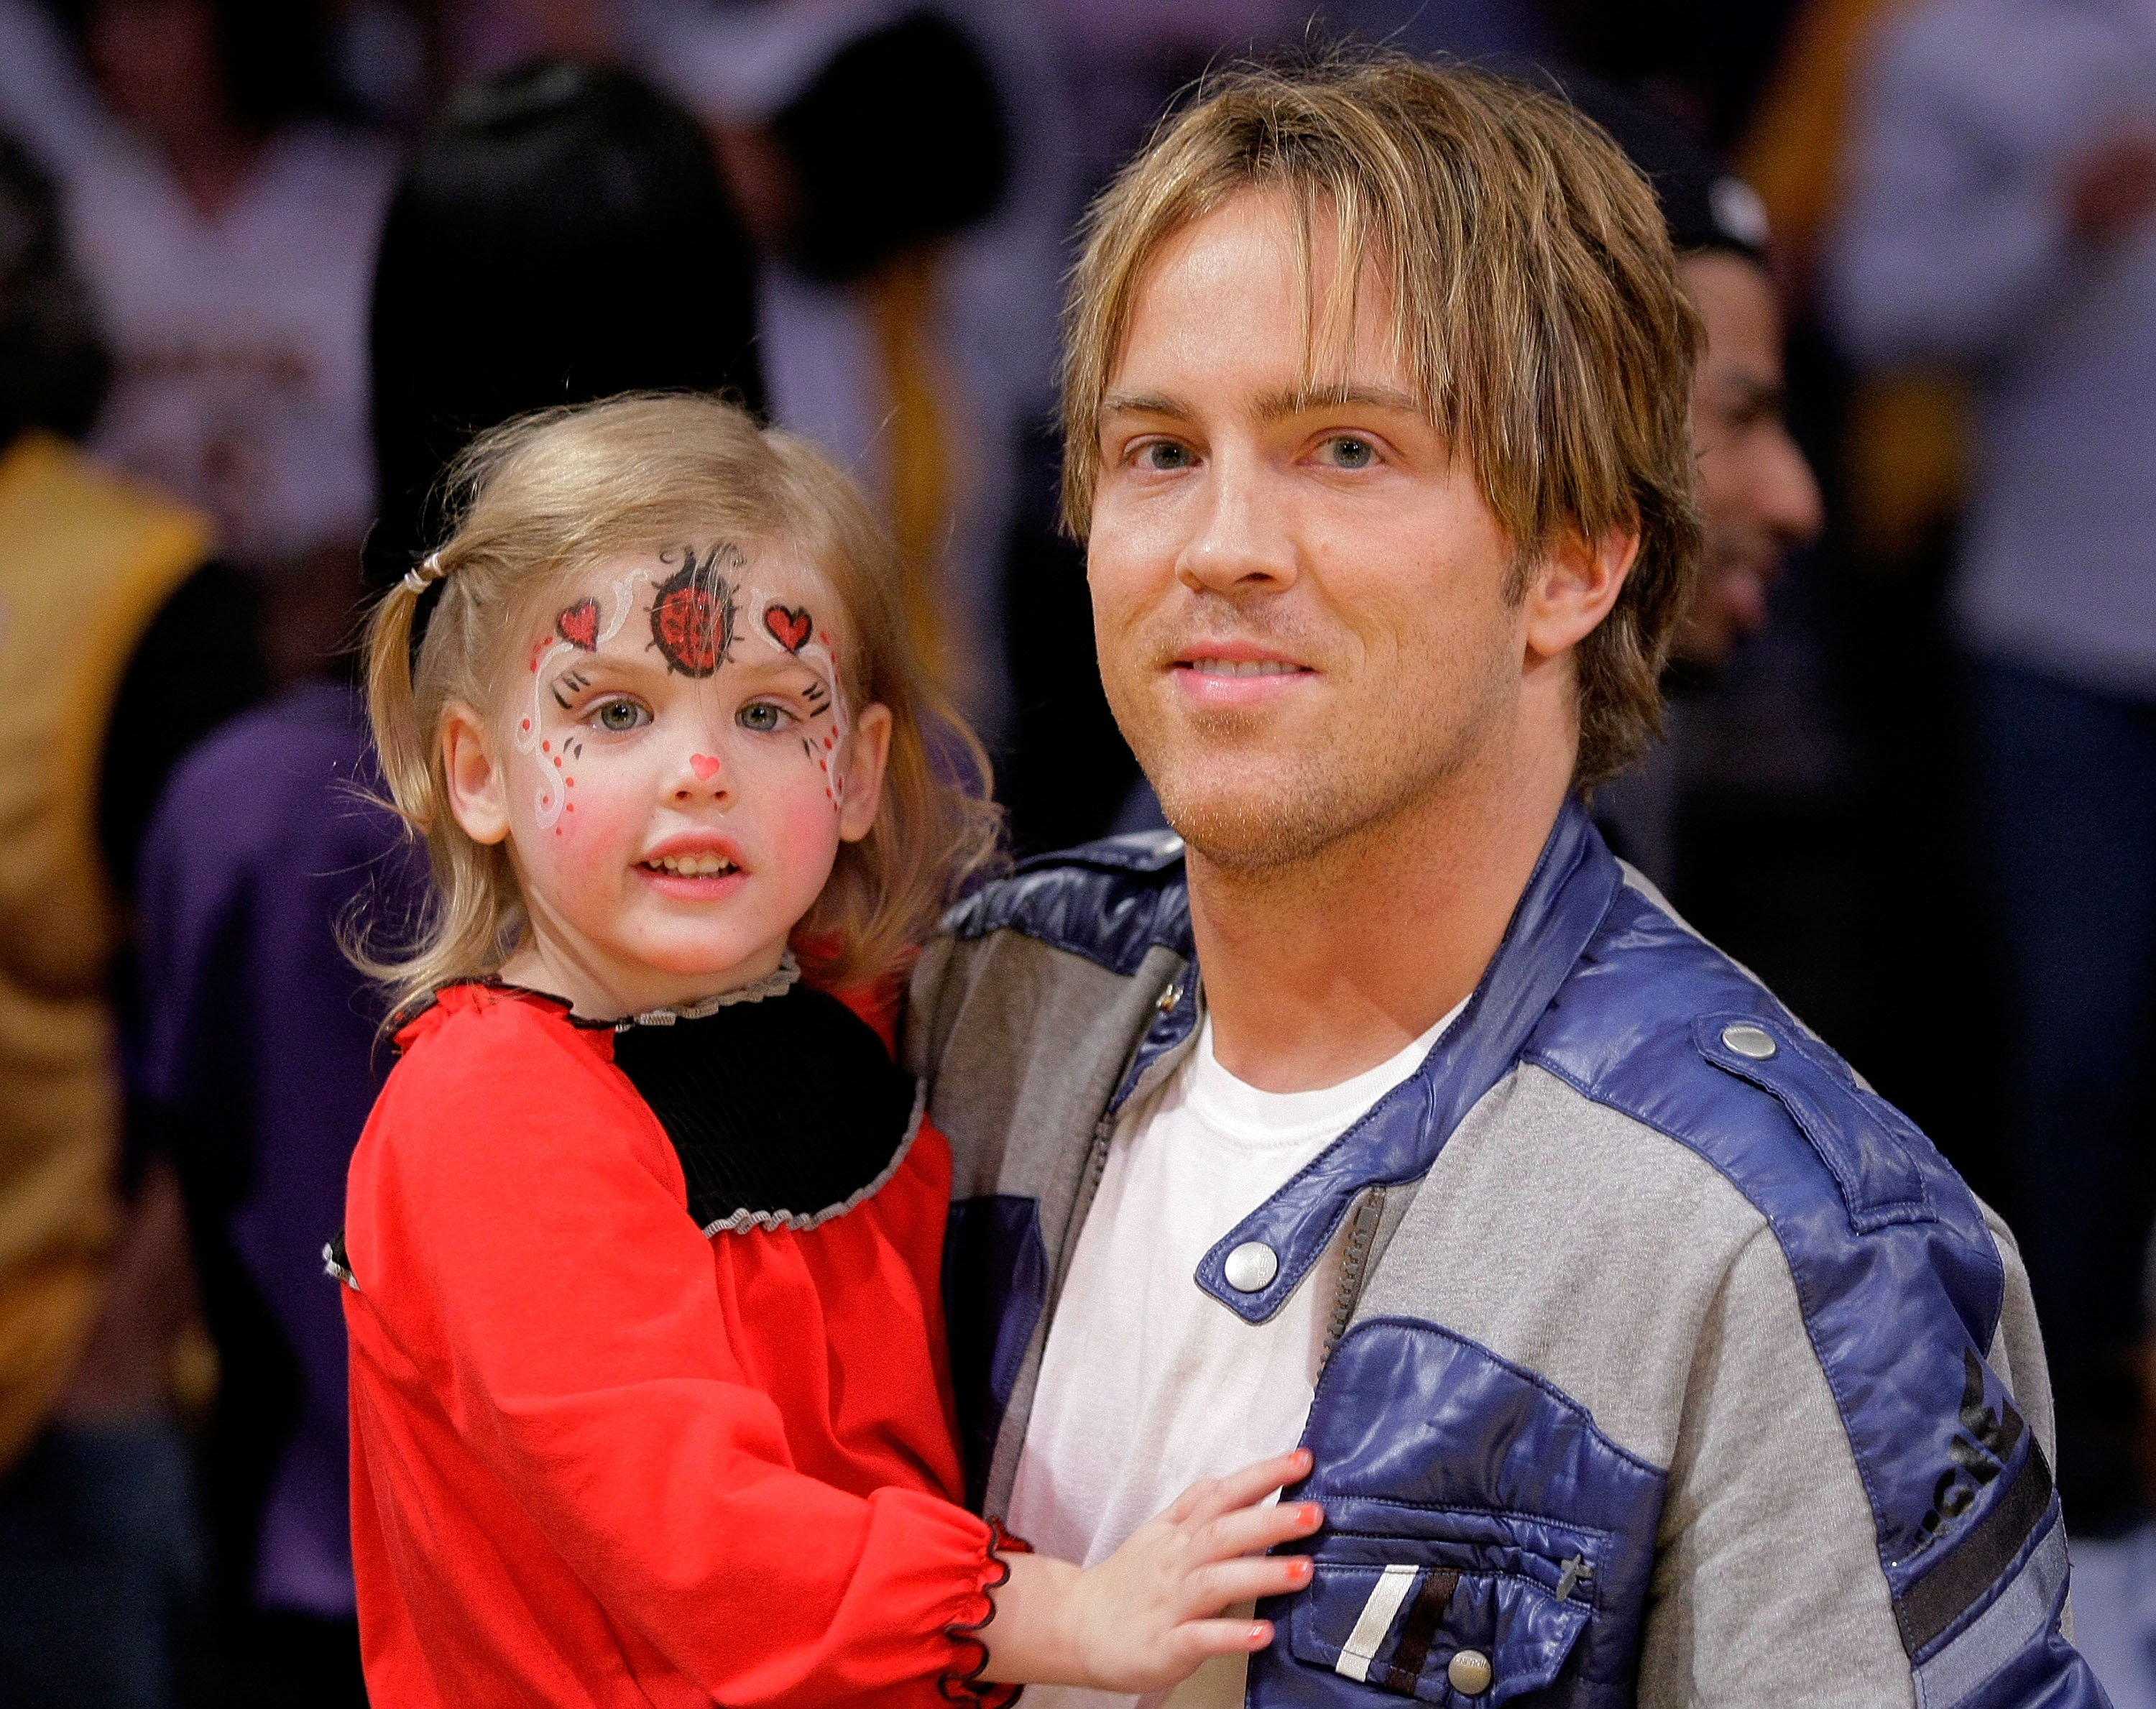 Larry Birkhead and his daughter Dannielynn Birkhead at a game between the New Orleans Hornets and the Los Angeles Lakers on November 8, 2009 in Los Angeles, California | Source: Getty Images